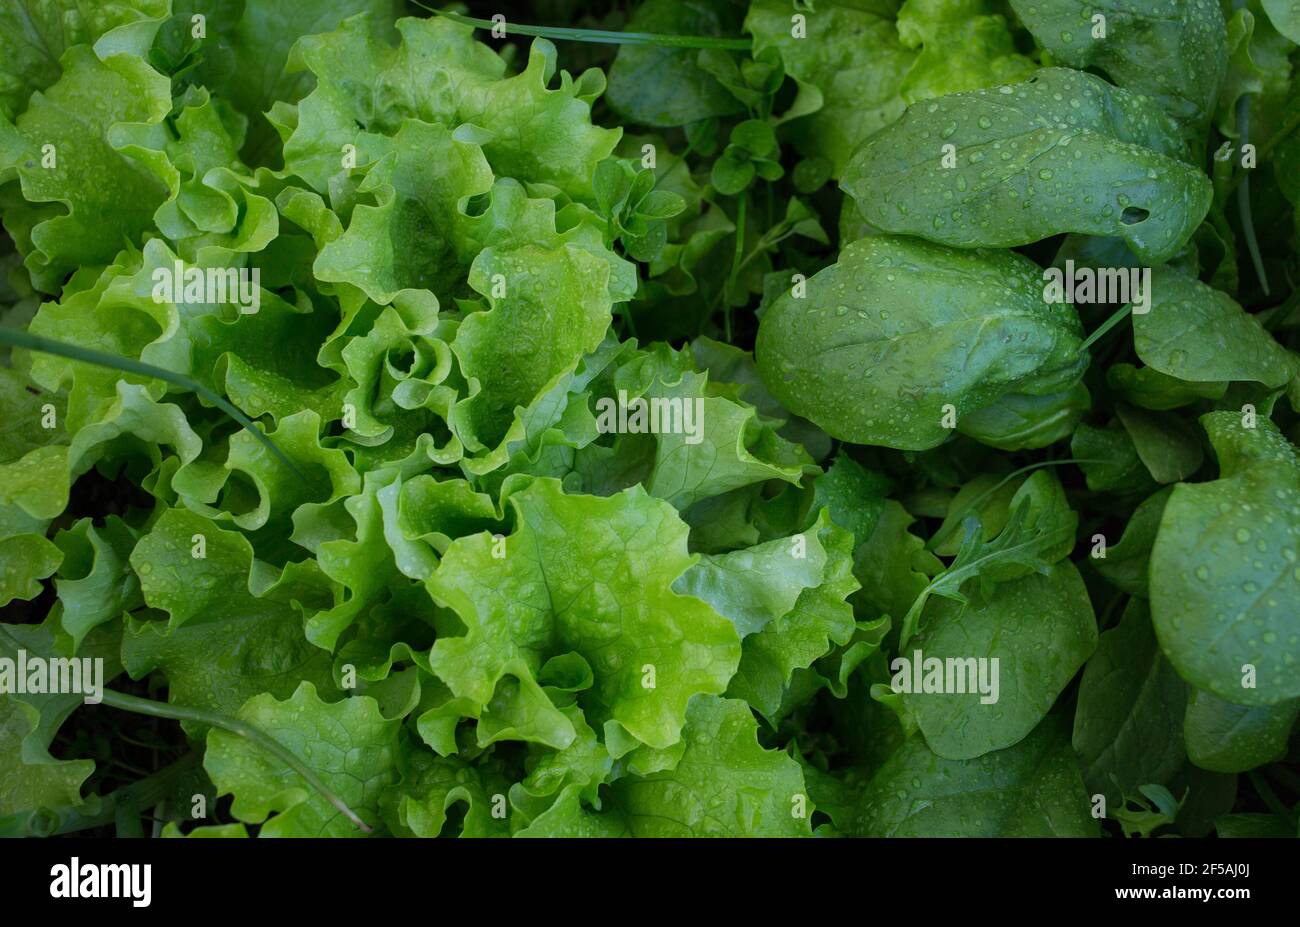 Onions, spinach, lettuce. Fresh nutritious vitamin greens in the garden beds. Organic farming. Salad ingredients. After the rain. Selective focus. Clo Stock Photo